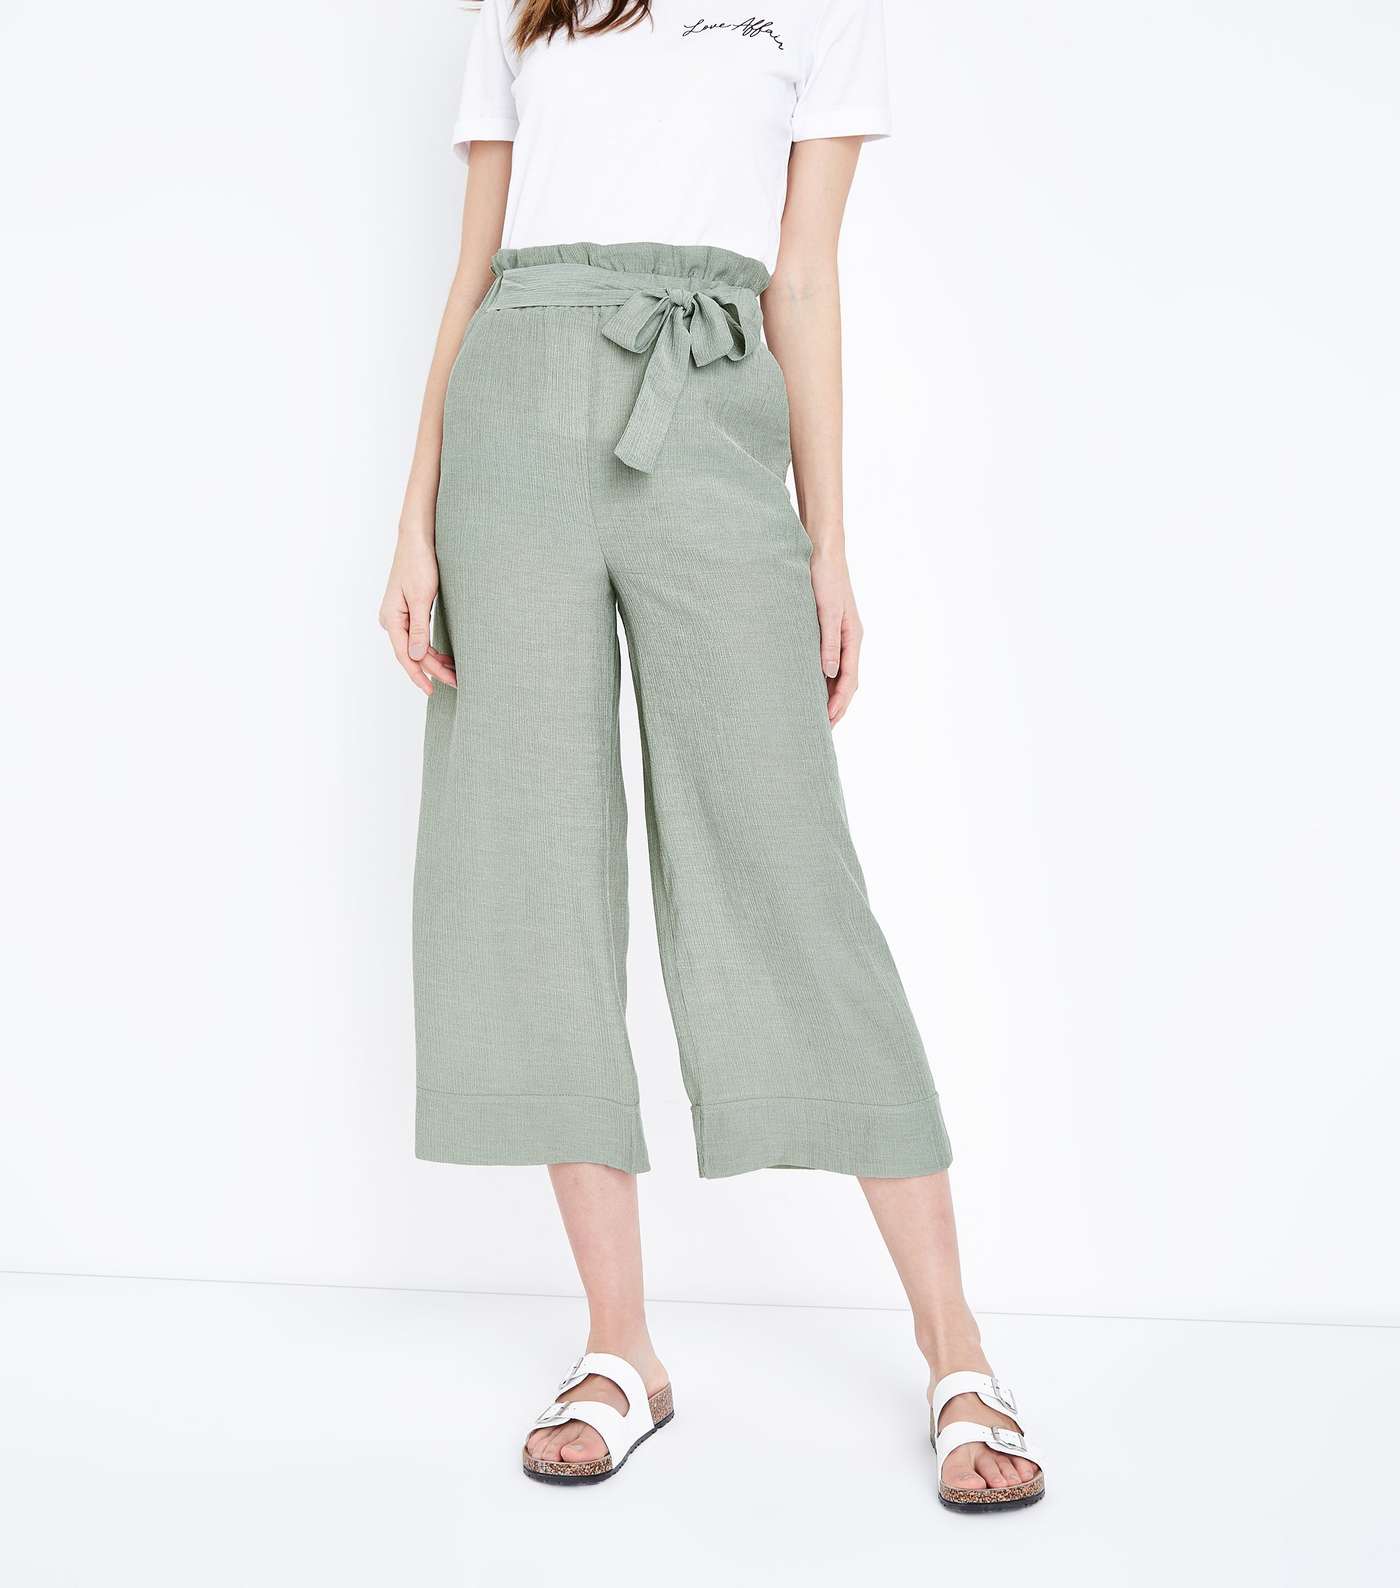 Mint Green Crepe Tie Waist Cropped Trousers Image 2